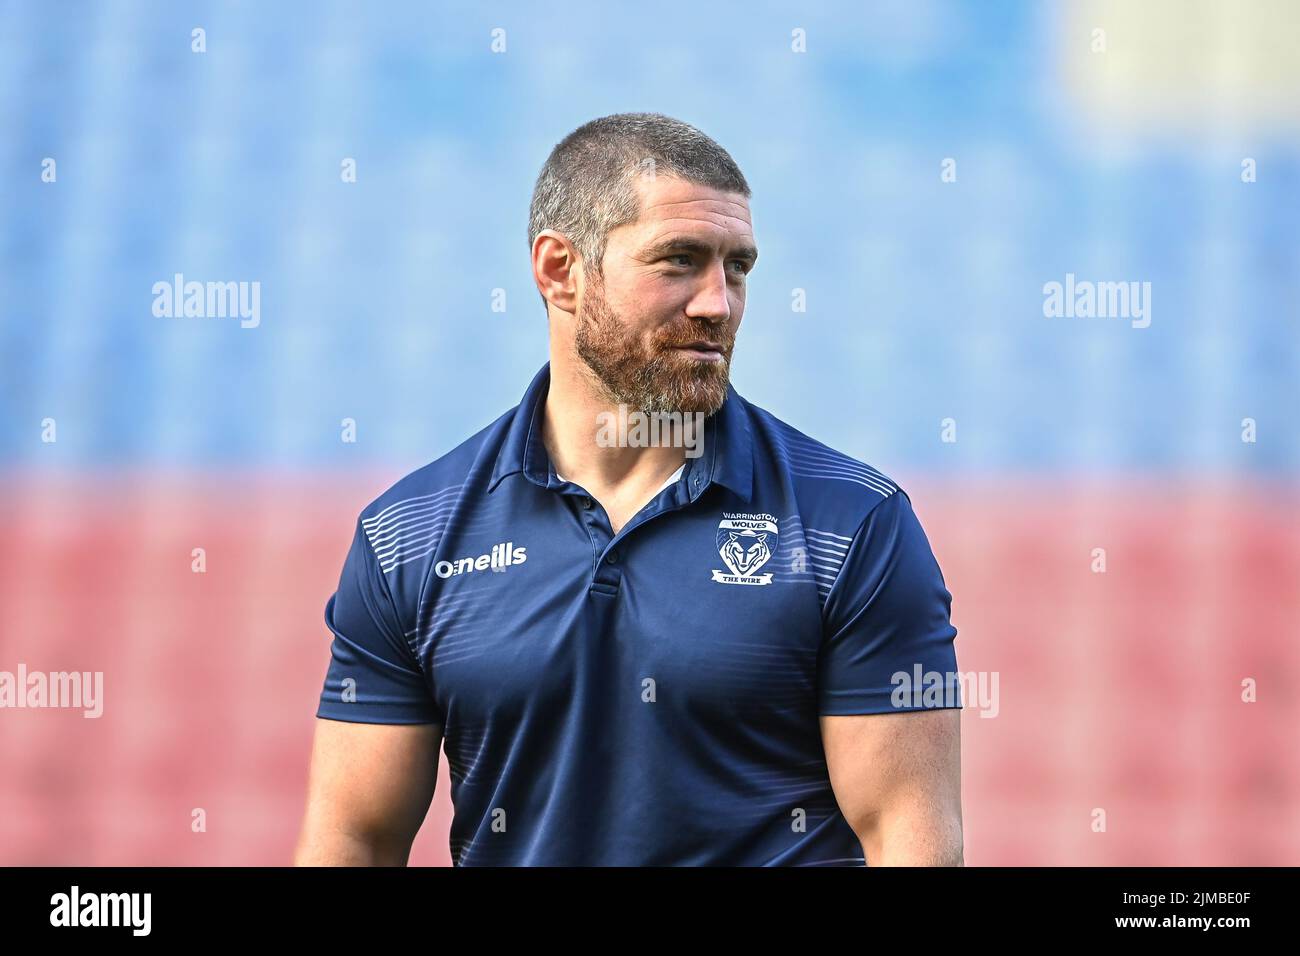 Kyle Amor #32 of Warrington Wolves arrives at the DW Stadium, Home of Wigan Warriors in, on 8/5/2022. (Photo by Craig Thomas/News Images/Sipa USA) Credit: Sipa USA/Alamy Live News Stock Photo